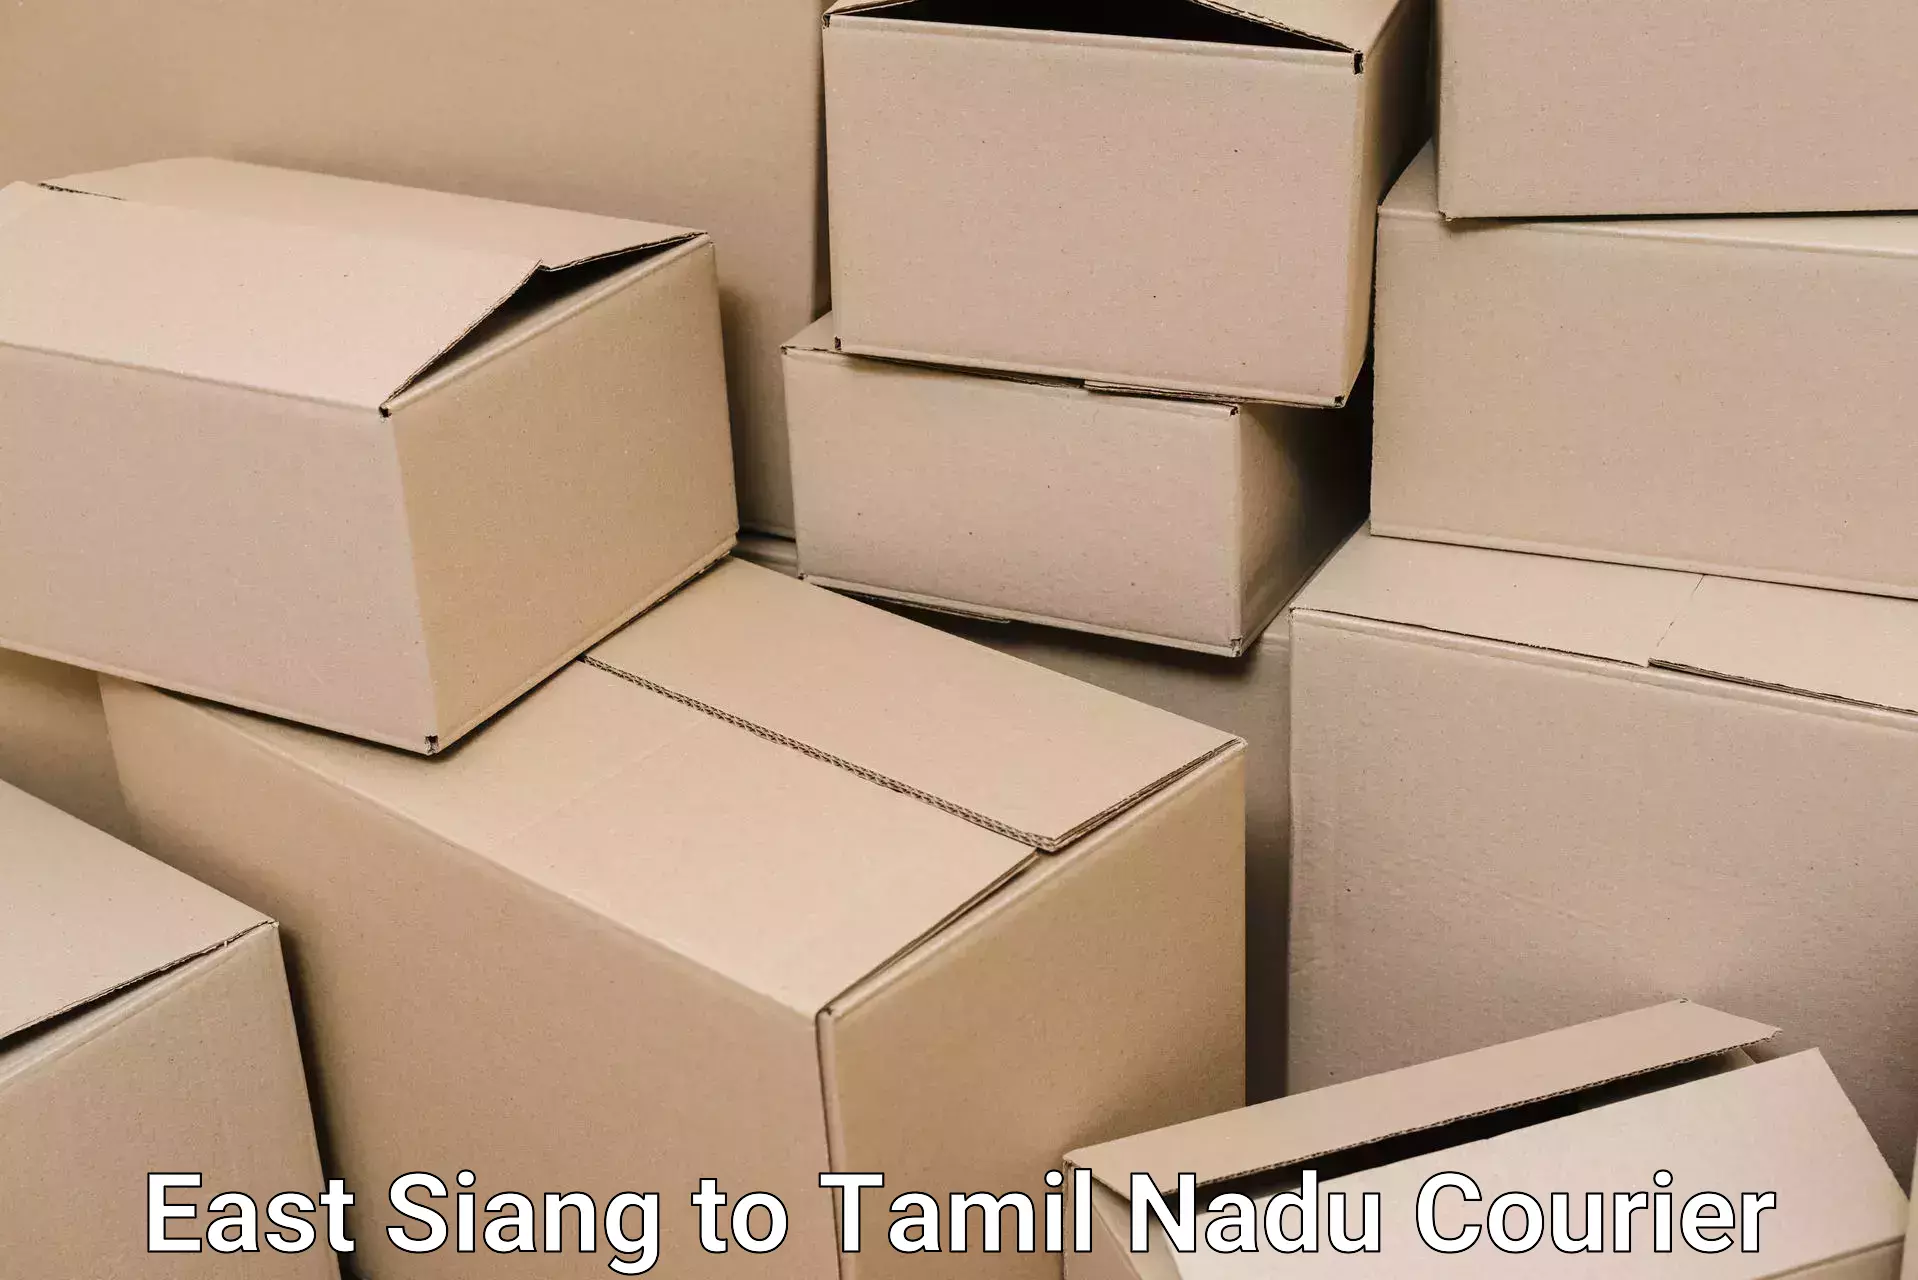 Moving and packing experts East Siang to Tamil Nadu